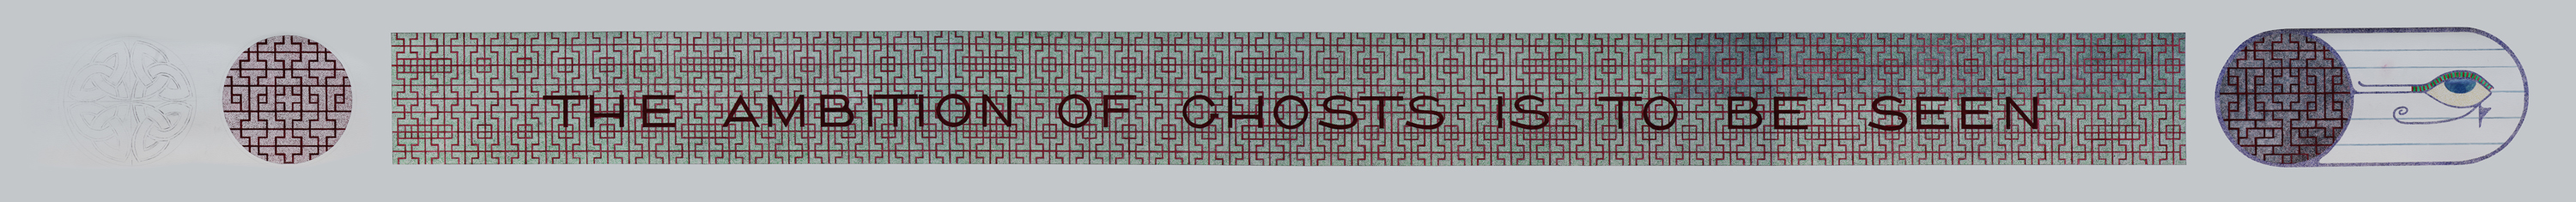 Ambiton of Ghosts Scroll